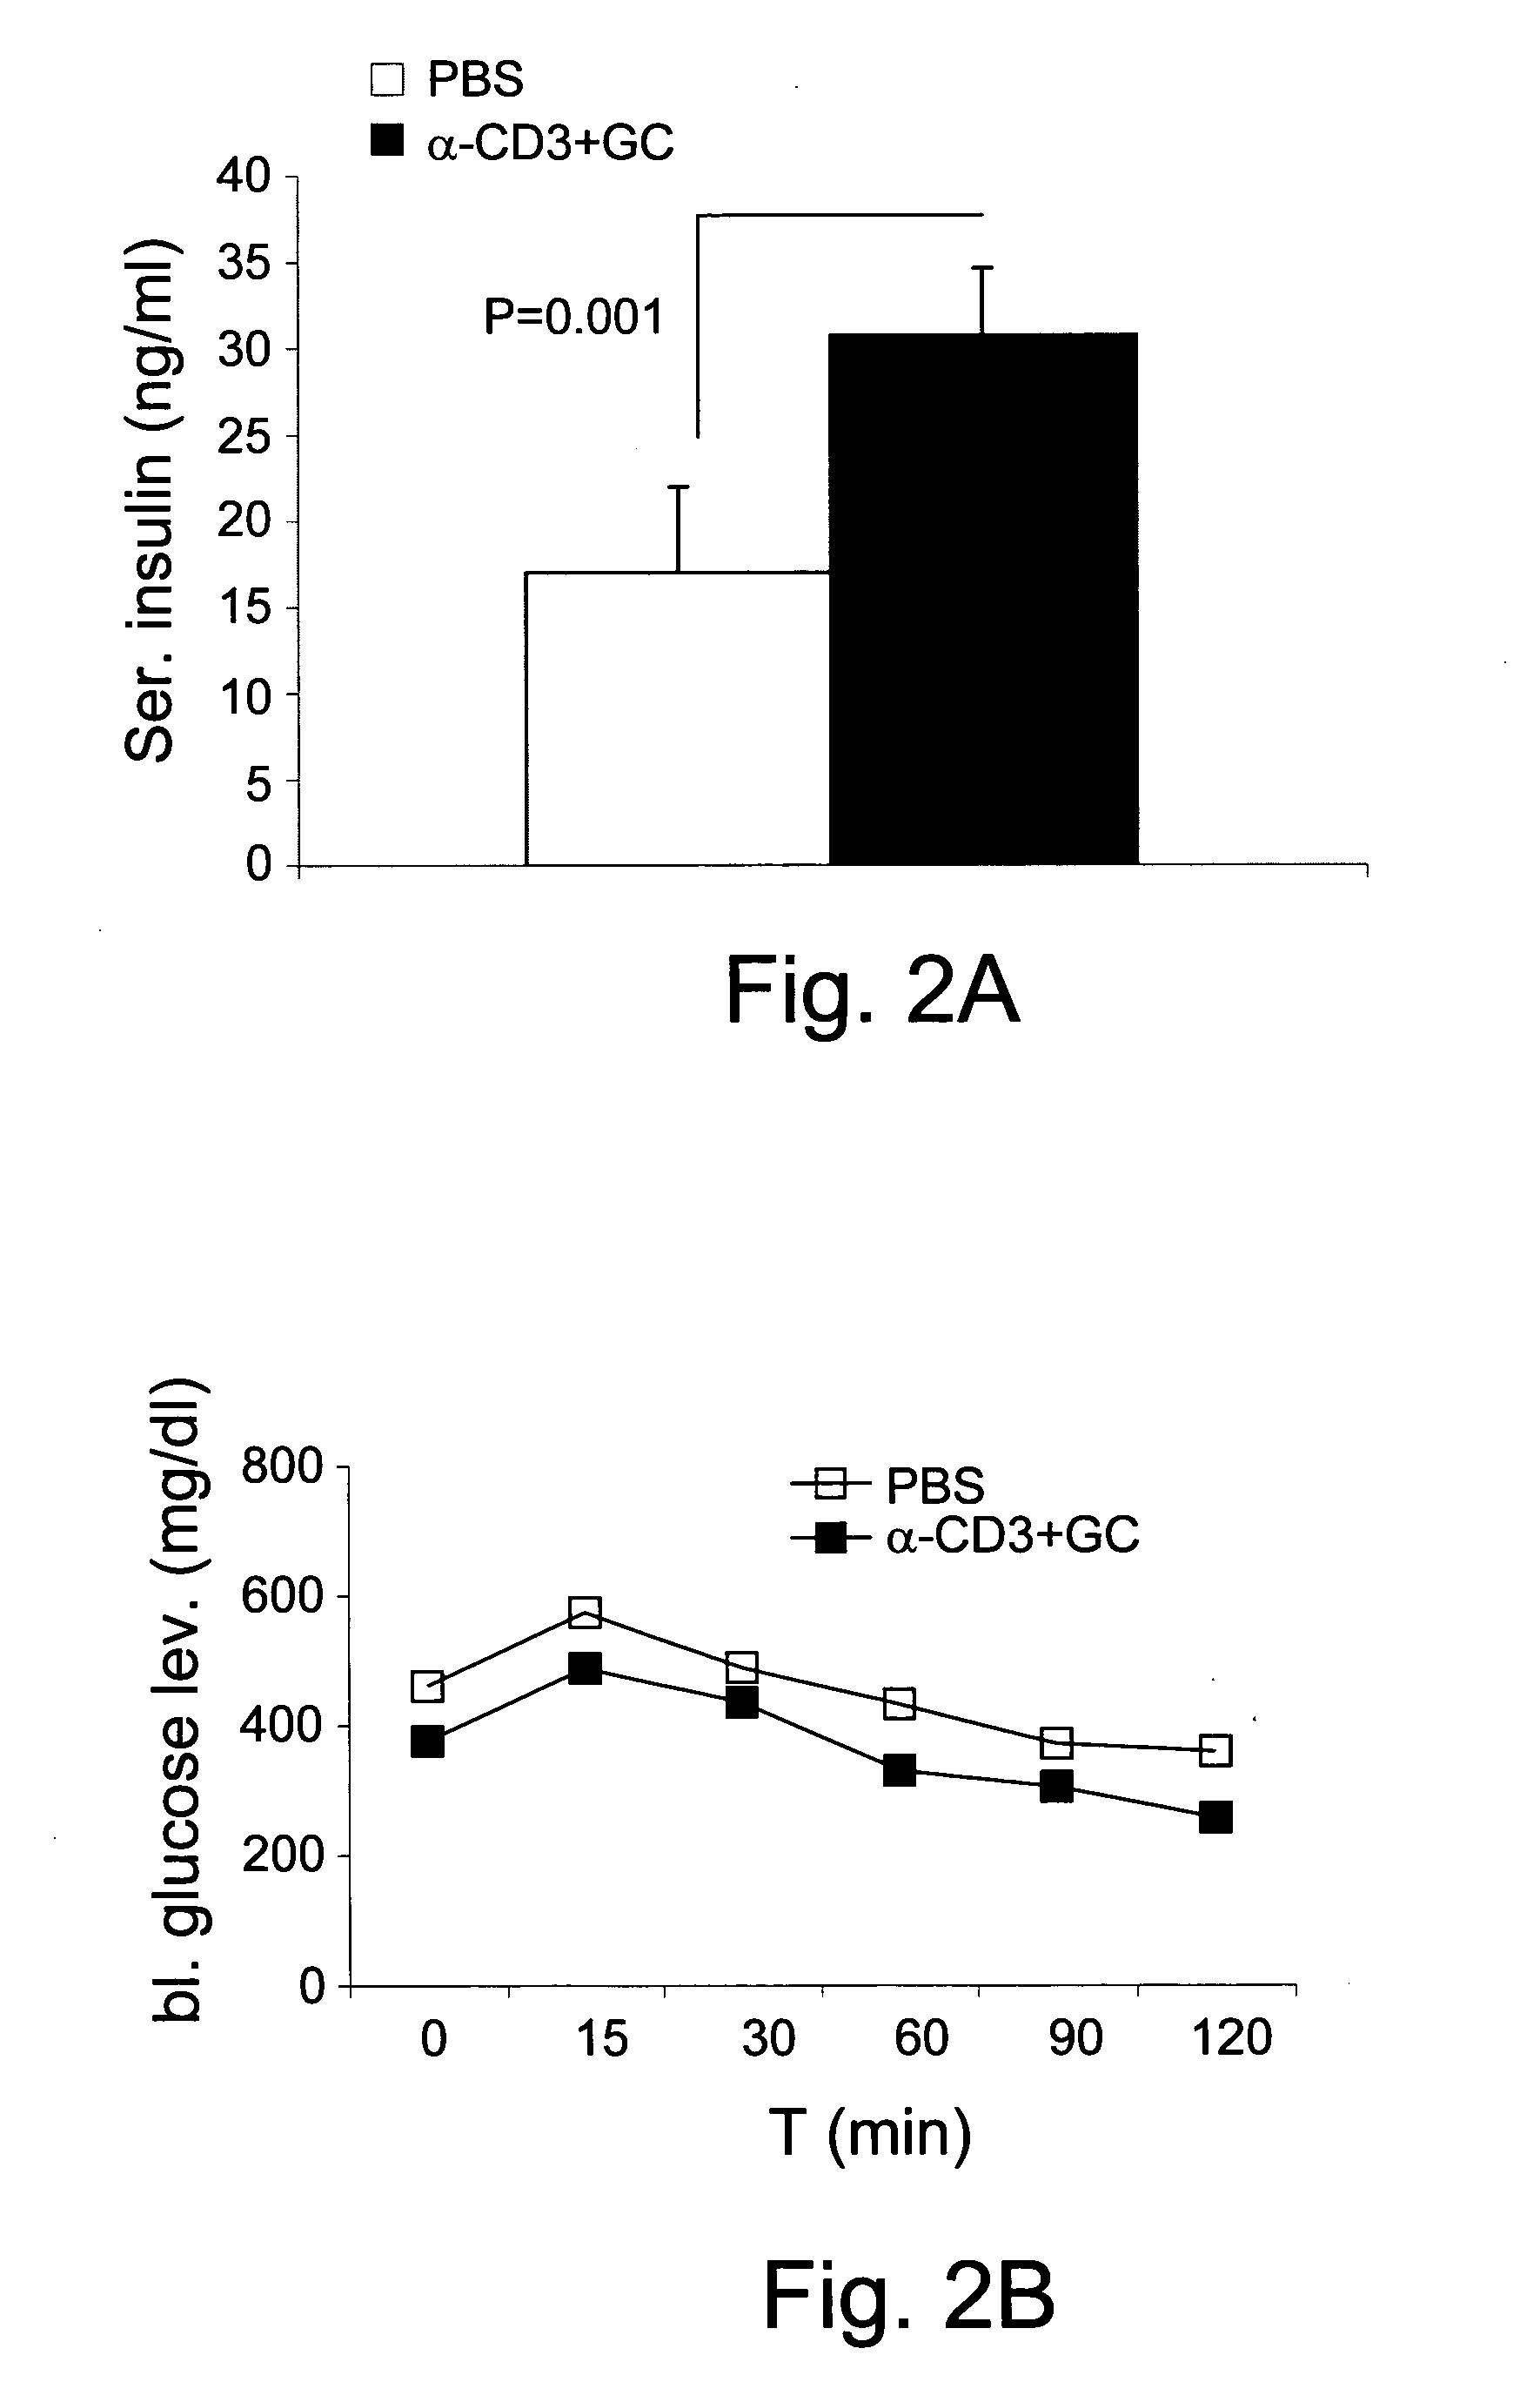 Combination therapy of beta-glycolipids and antibodies for the treatment of immune-related disorders